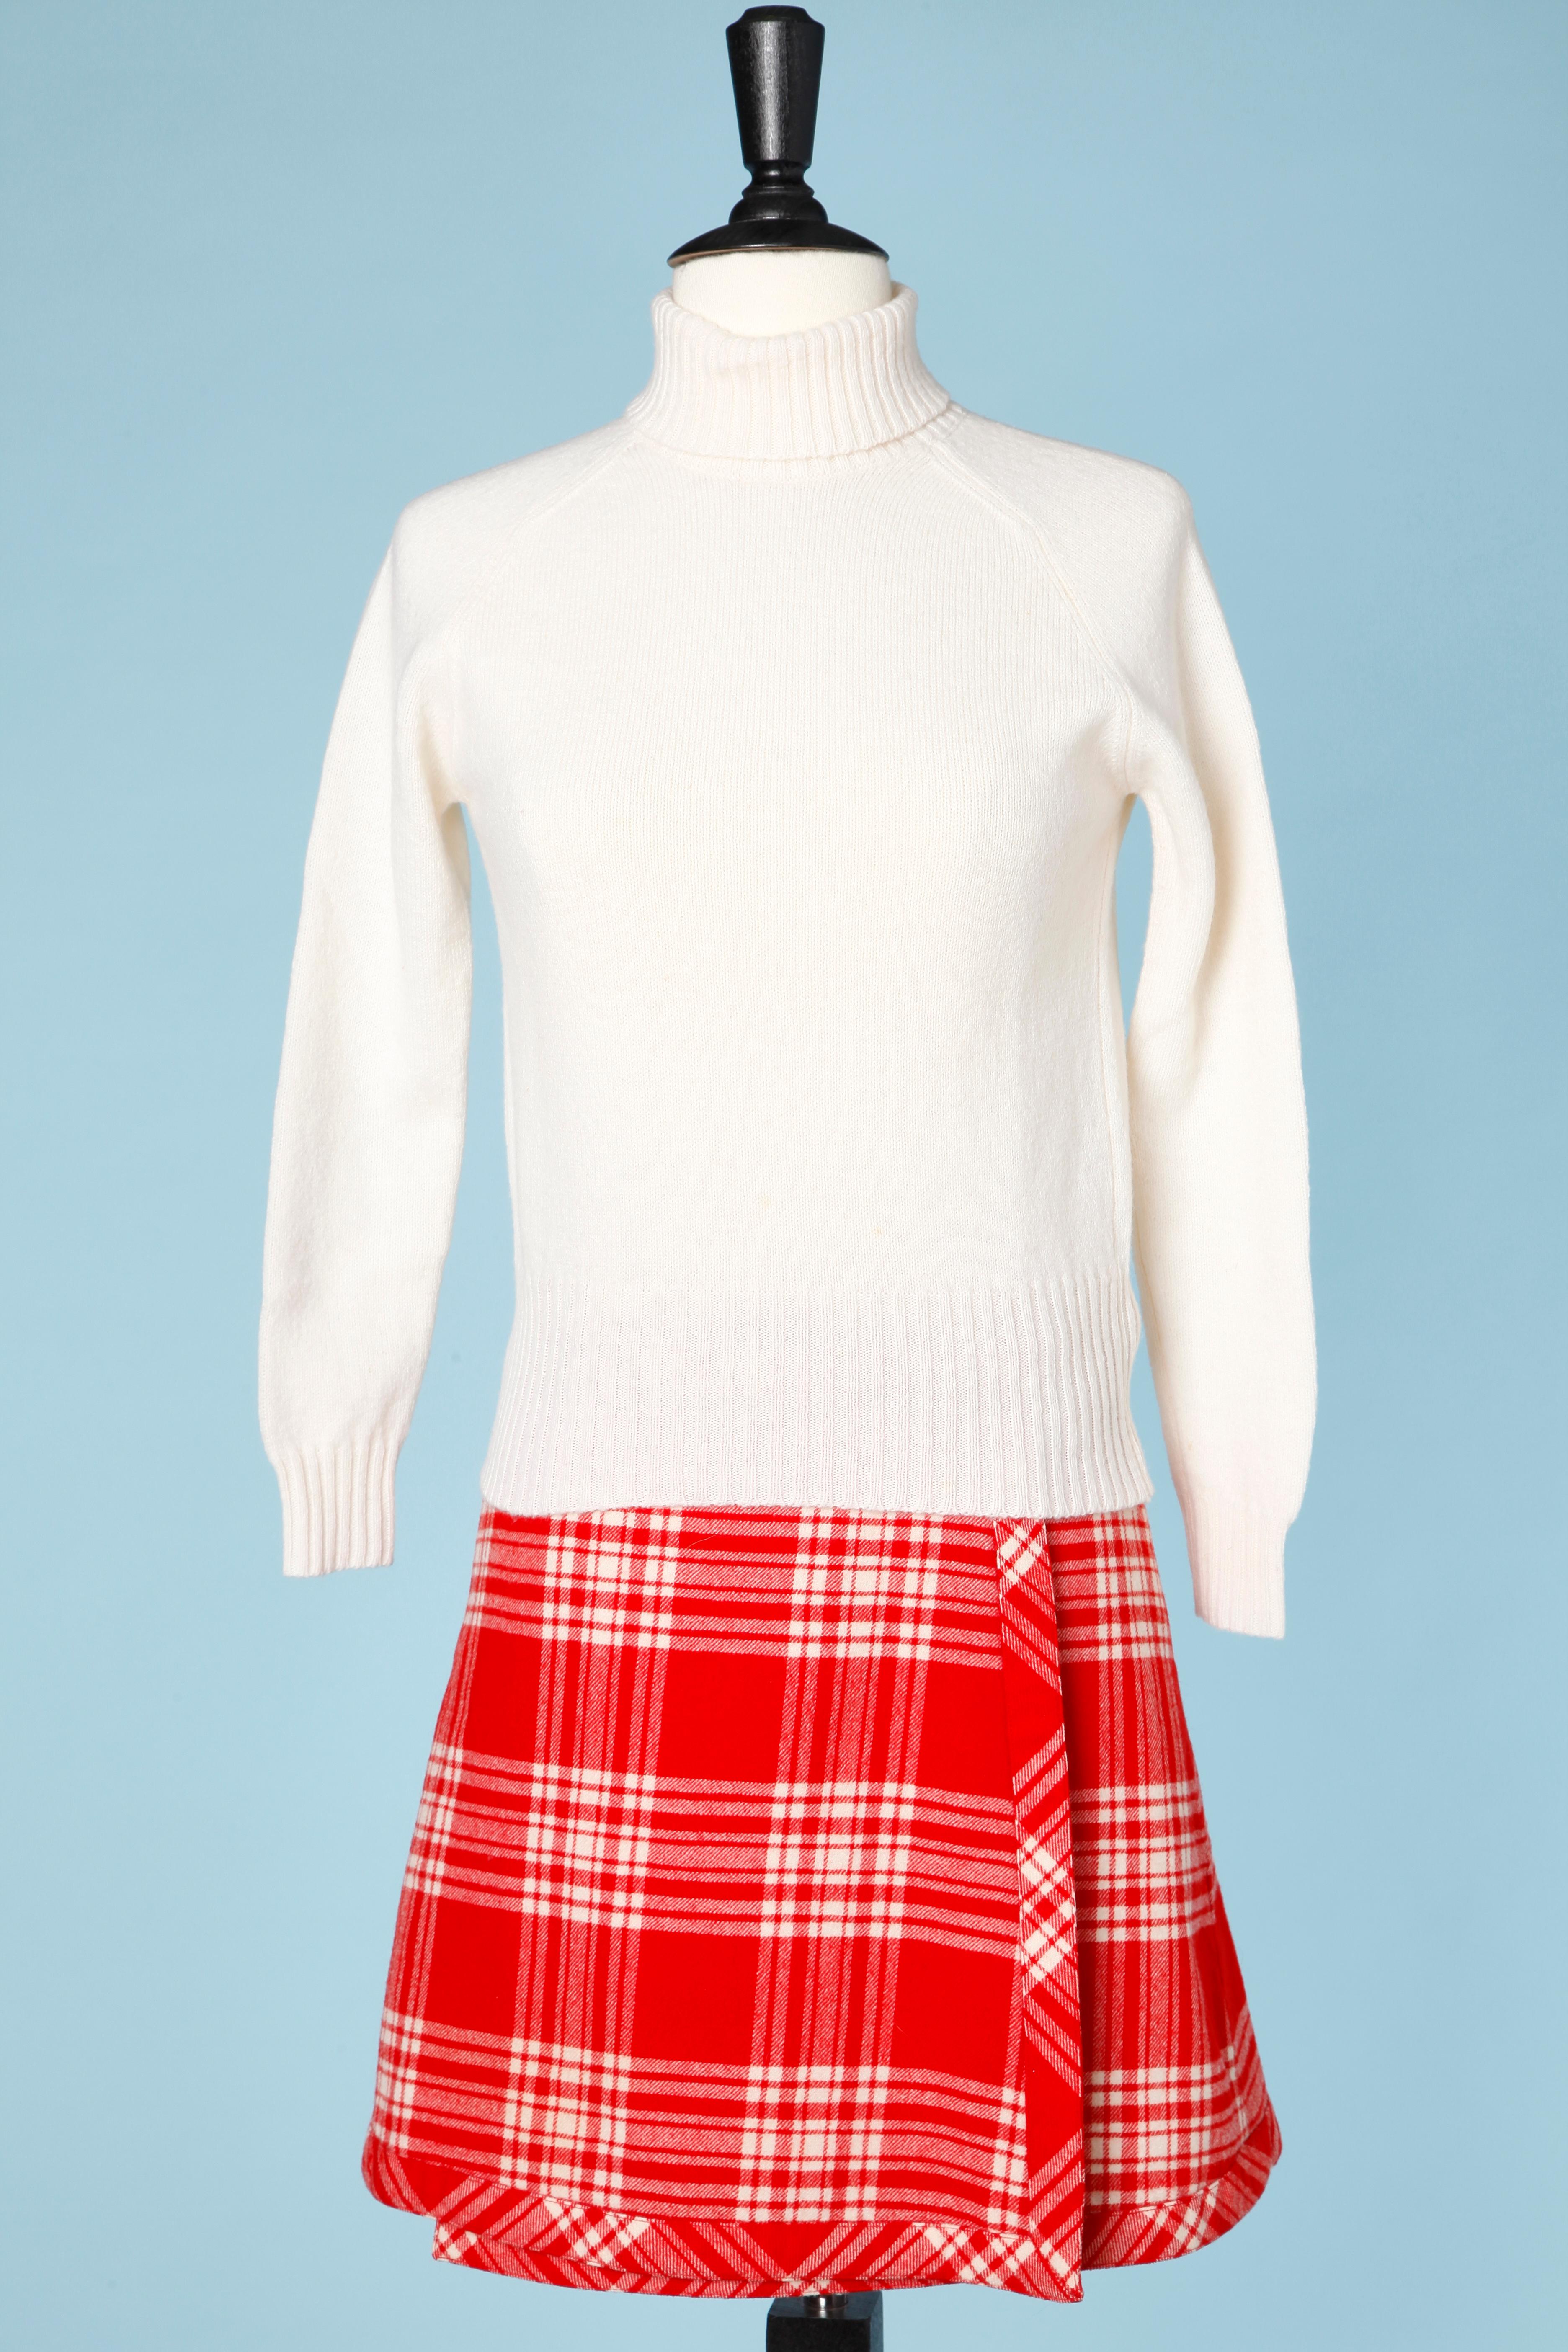 Mini skirt with red and white plaid, belt with buckle. 1 back pocket. Designed by Courrèges 